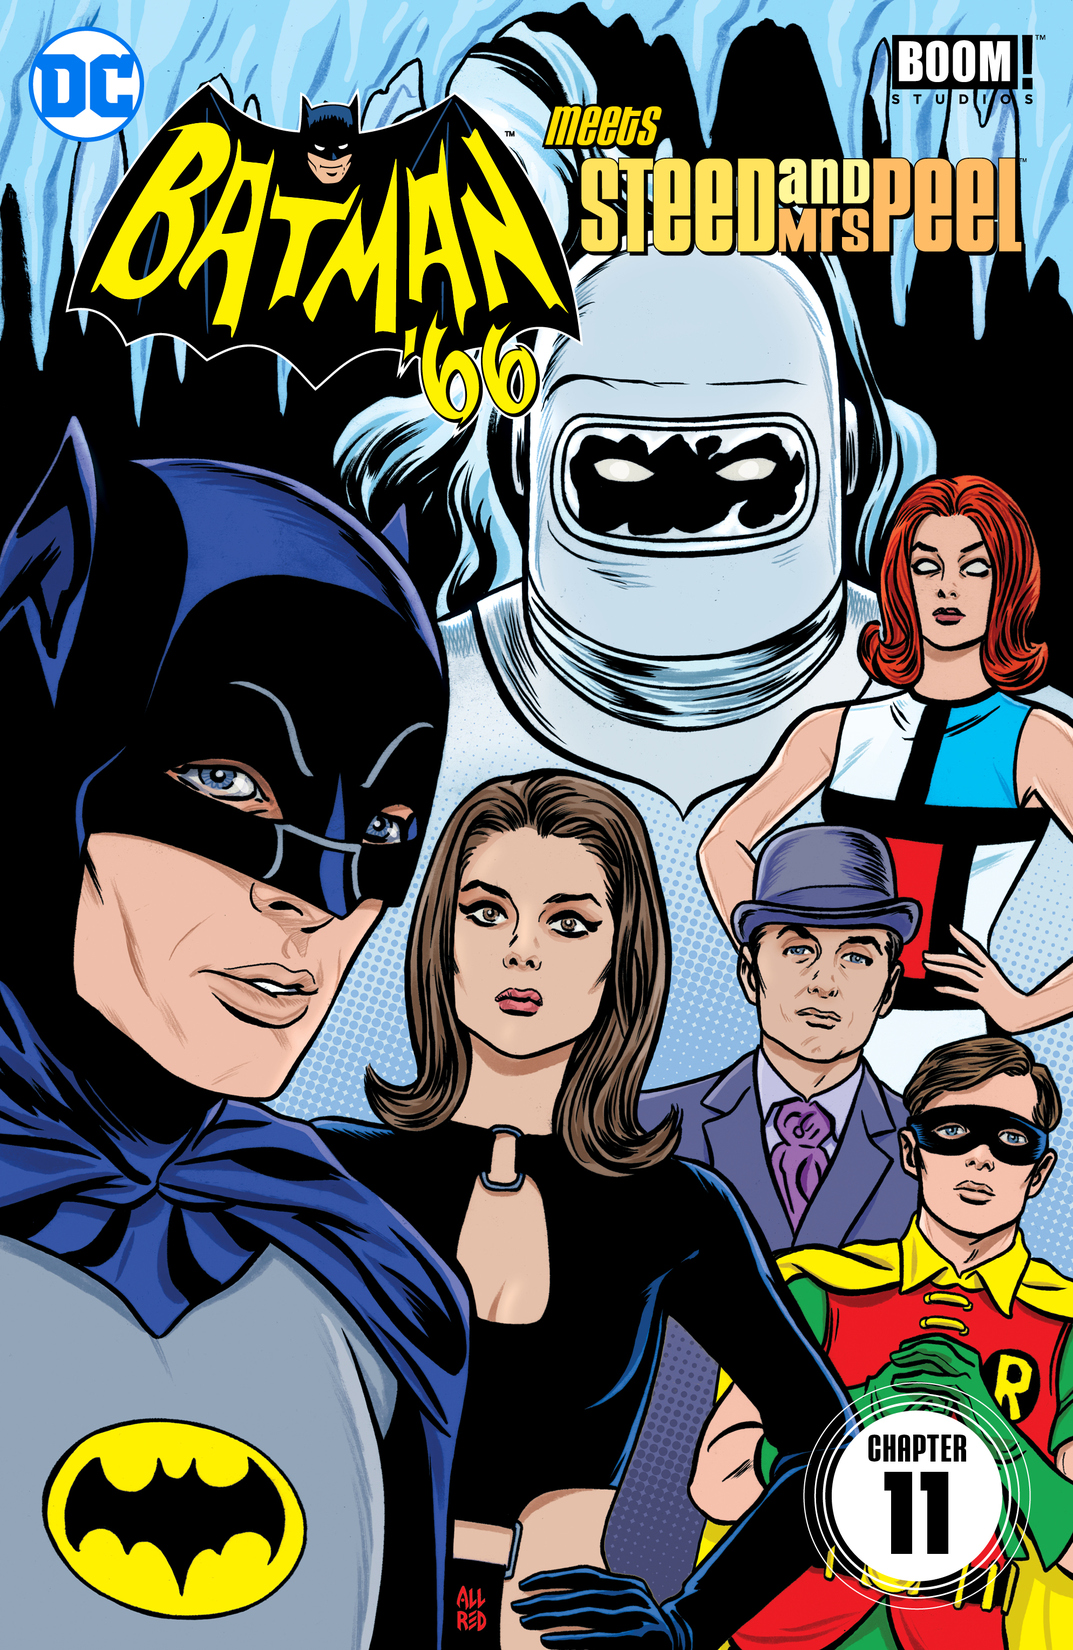 Batman '66 Meets Steed and Mrs Peel #11 preview images